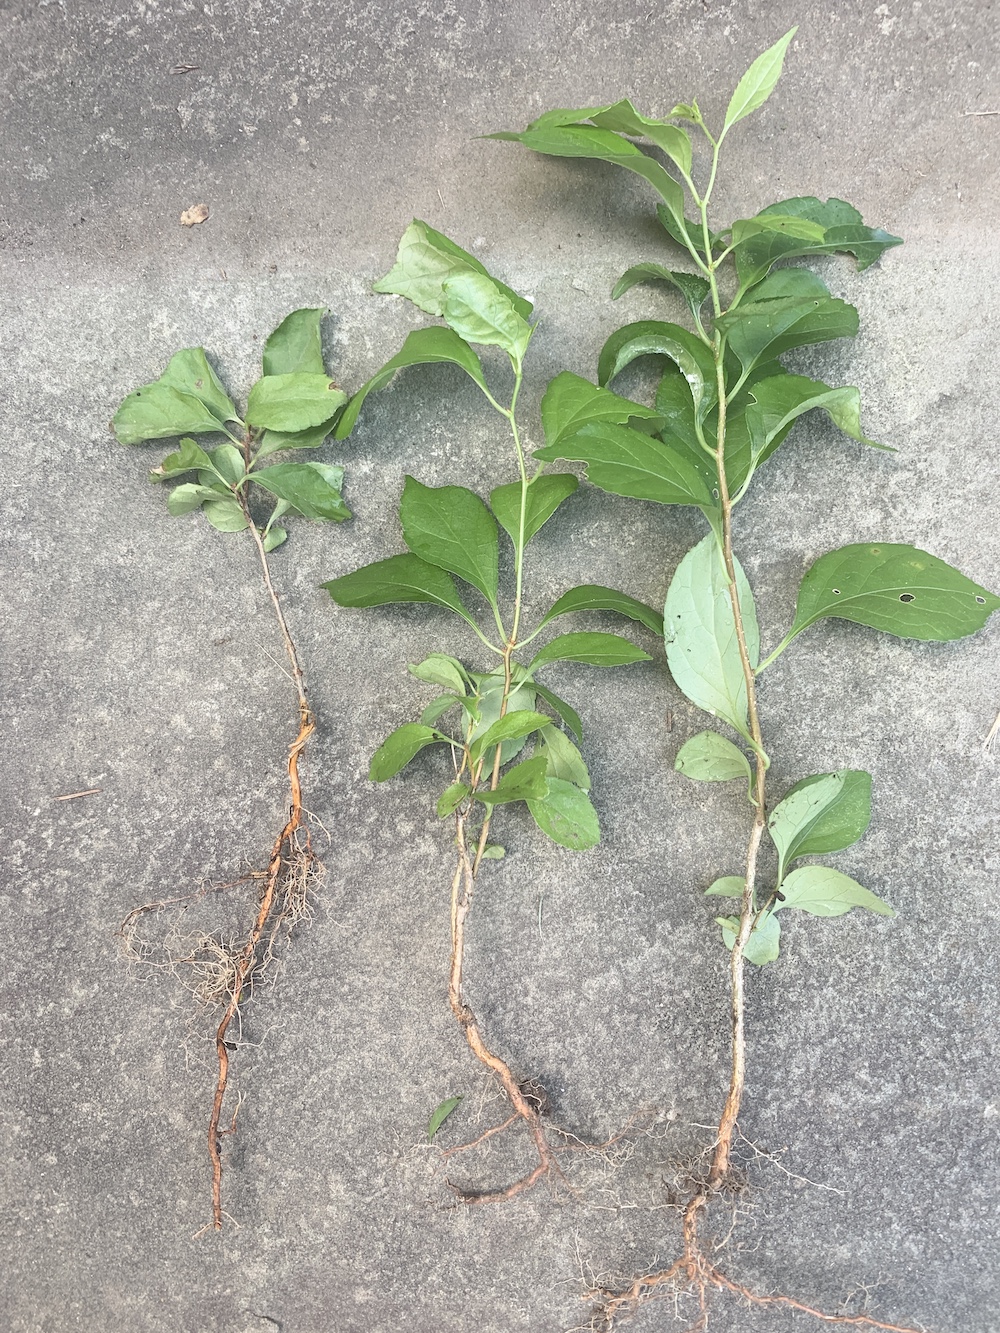 How to Get Rid of Oriental Bittersweet & Take Back Control of Your Yard 3 Small Bittersweet Vines #OrientalBittersweet #Invasive #InvasiveBittersweet #invasiveVines